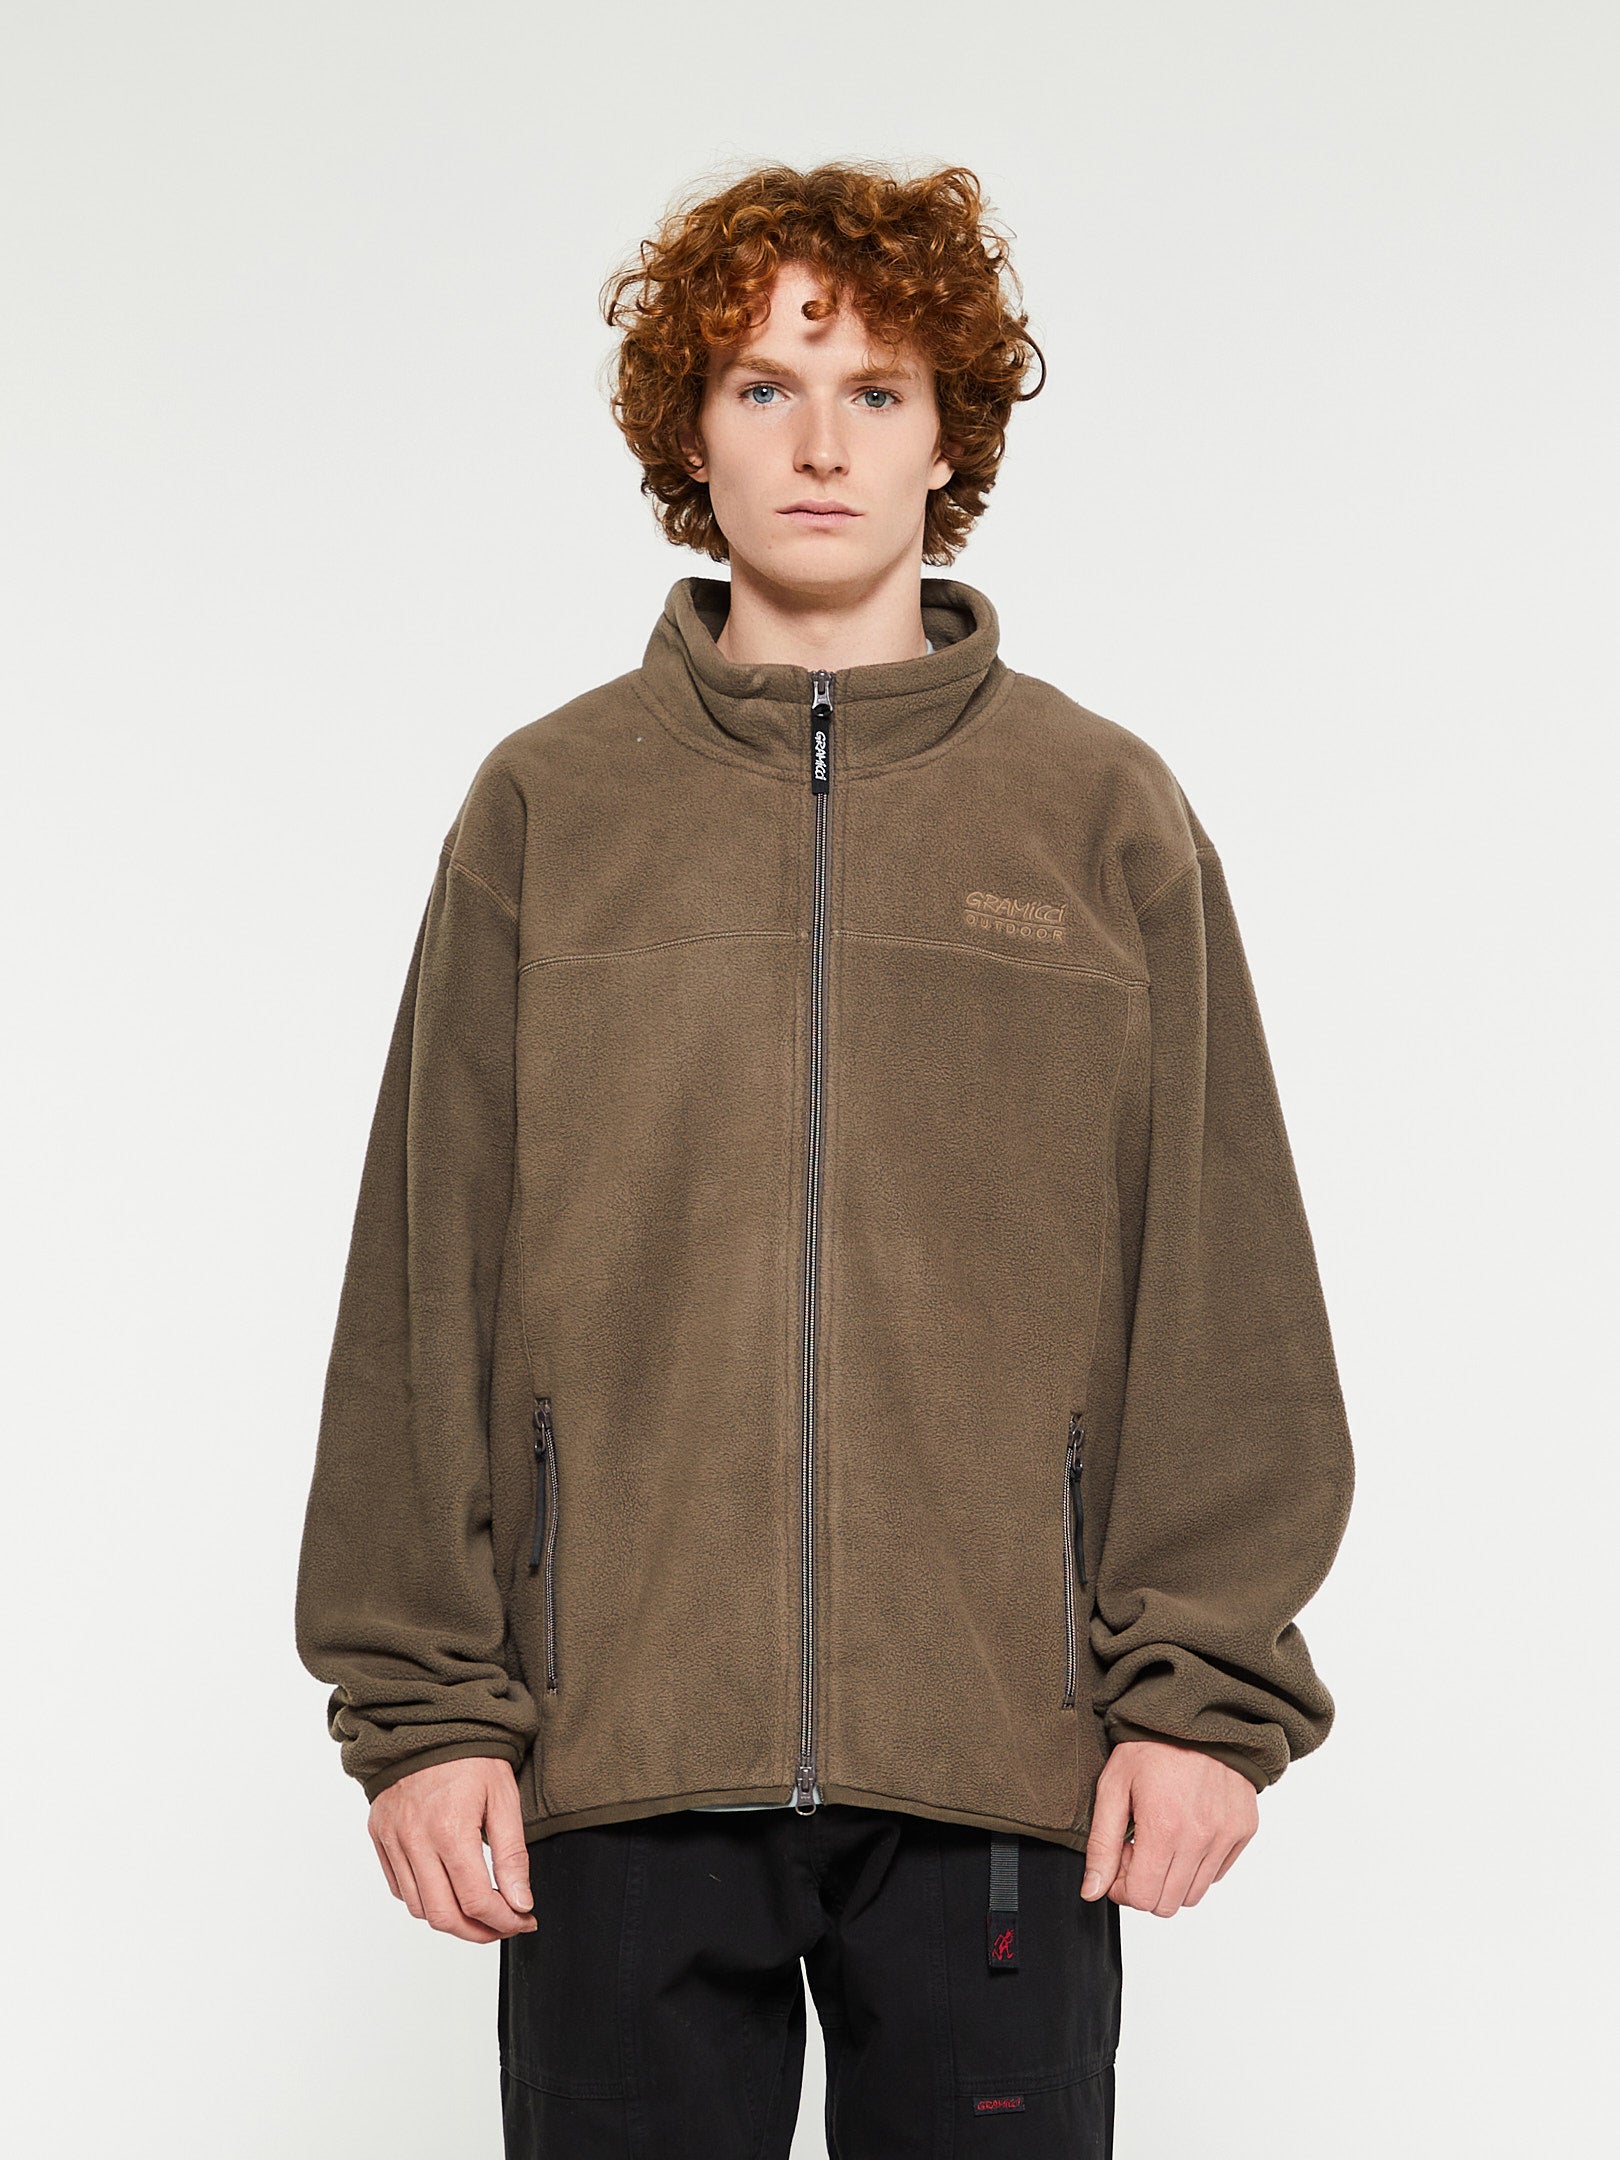 Gramicci - Thermal Fleece Jacket in Taupe